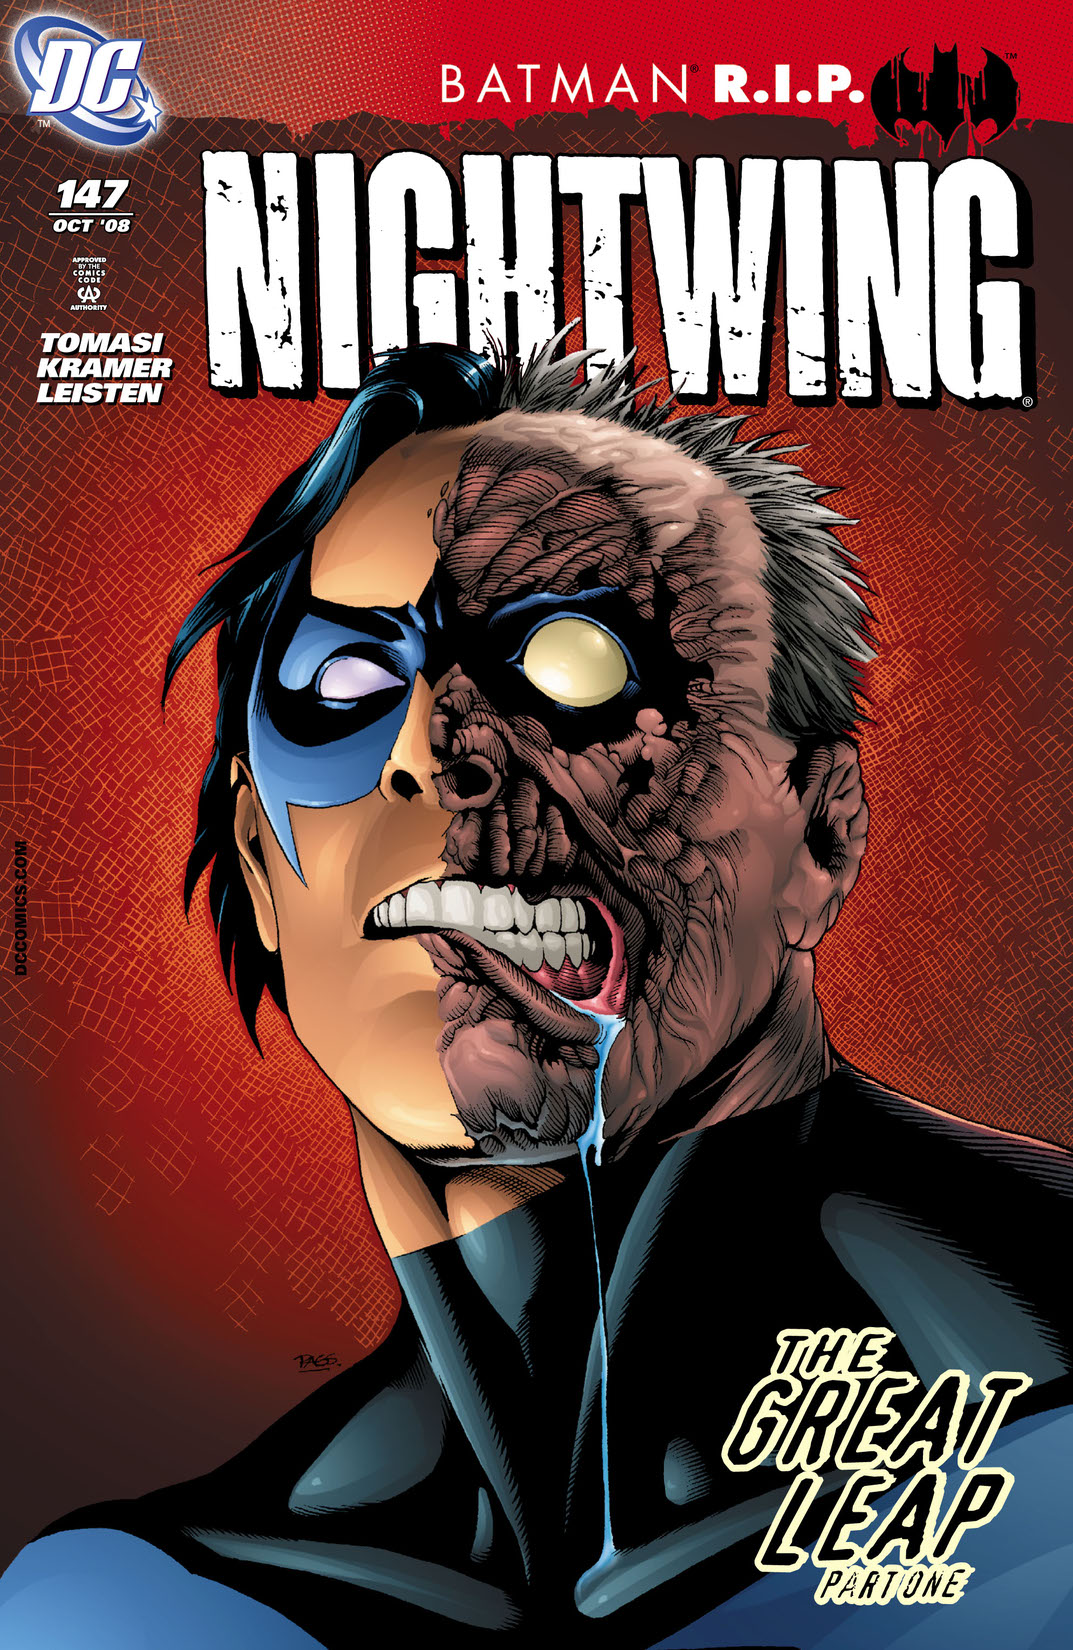 Nightwing (1996-) #147 preview images